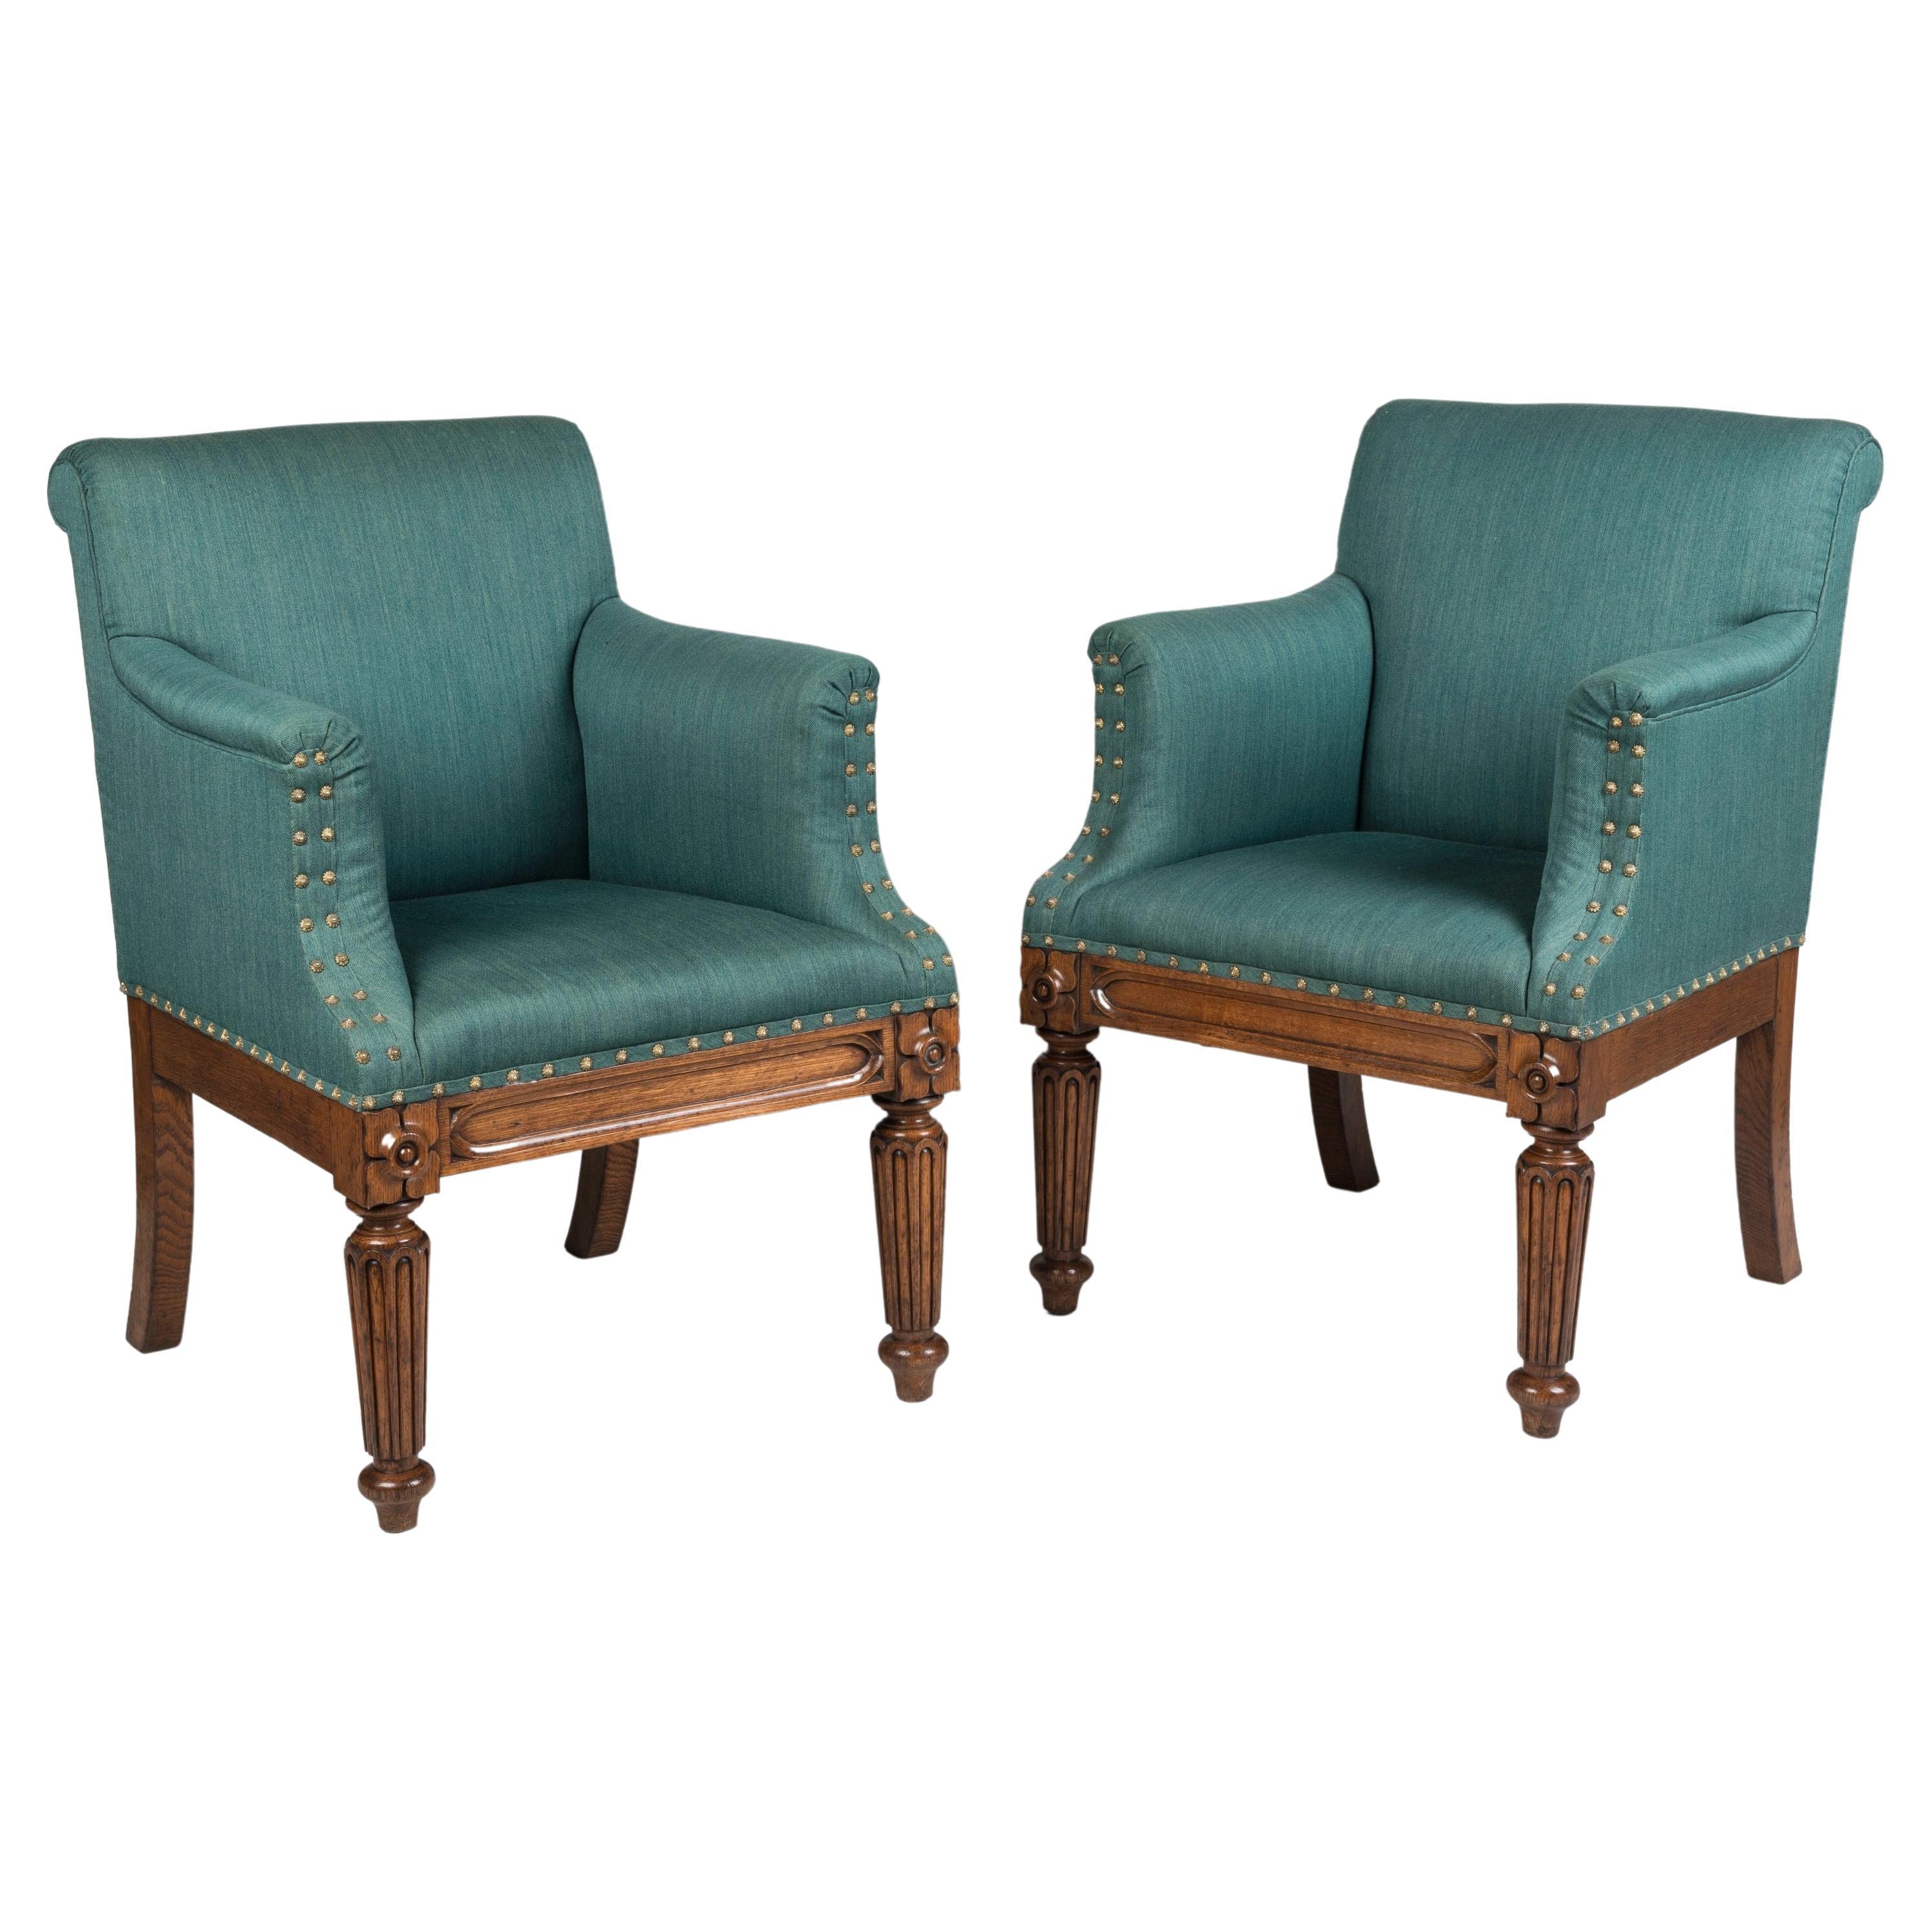 19th Century George IV Period Carved Oak Armchairs with Blue Upholstery For Sale